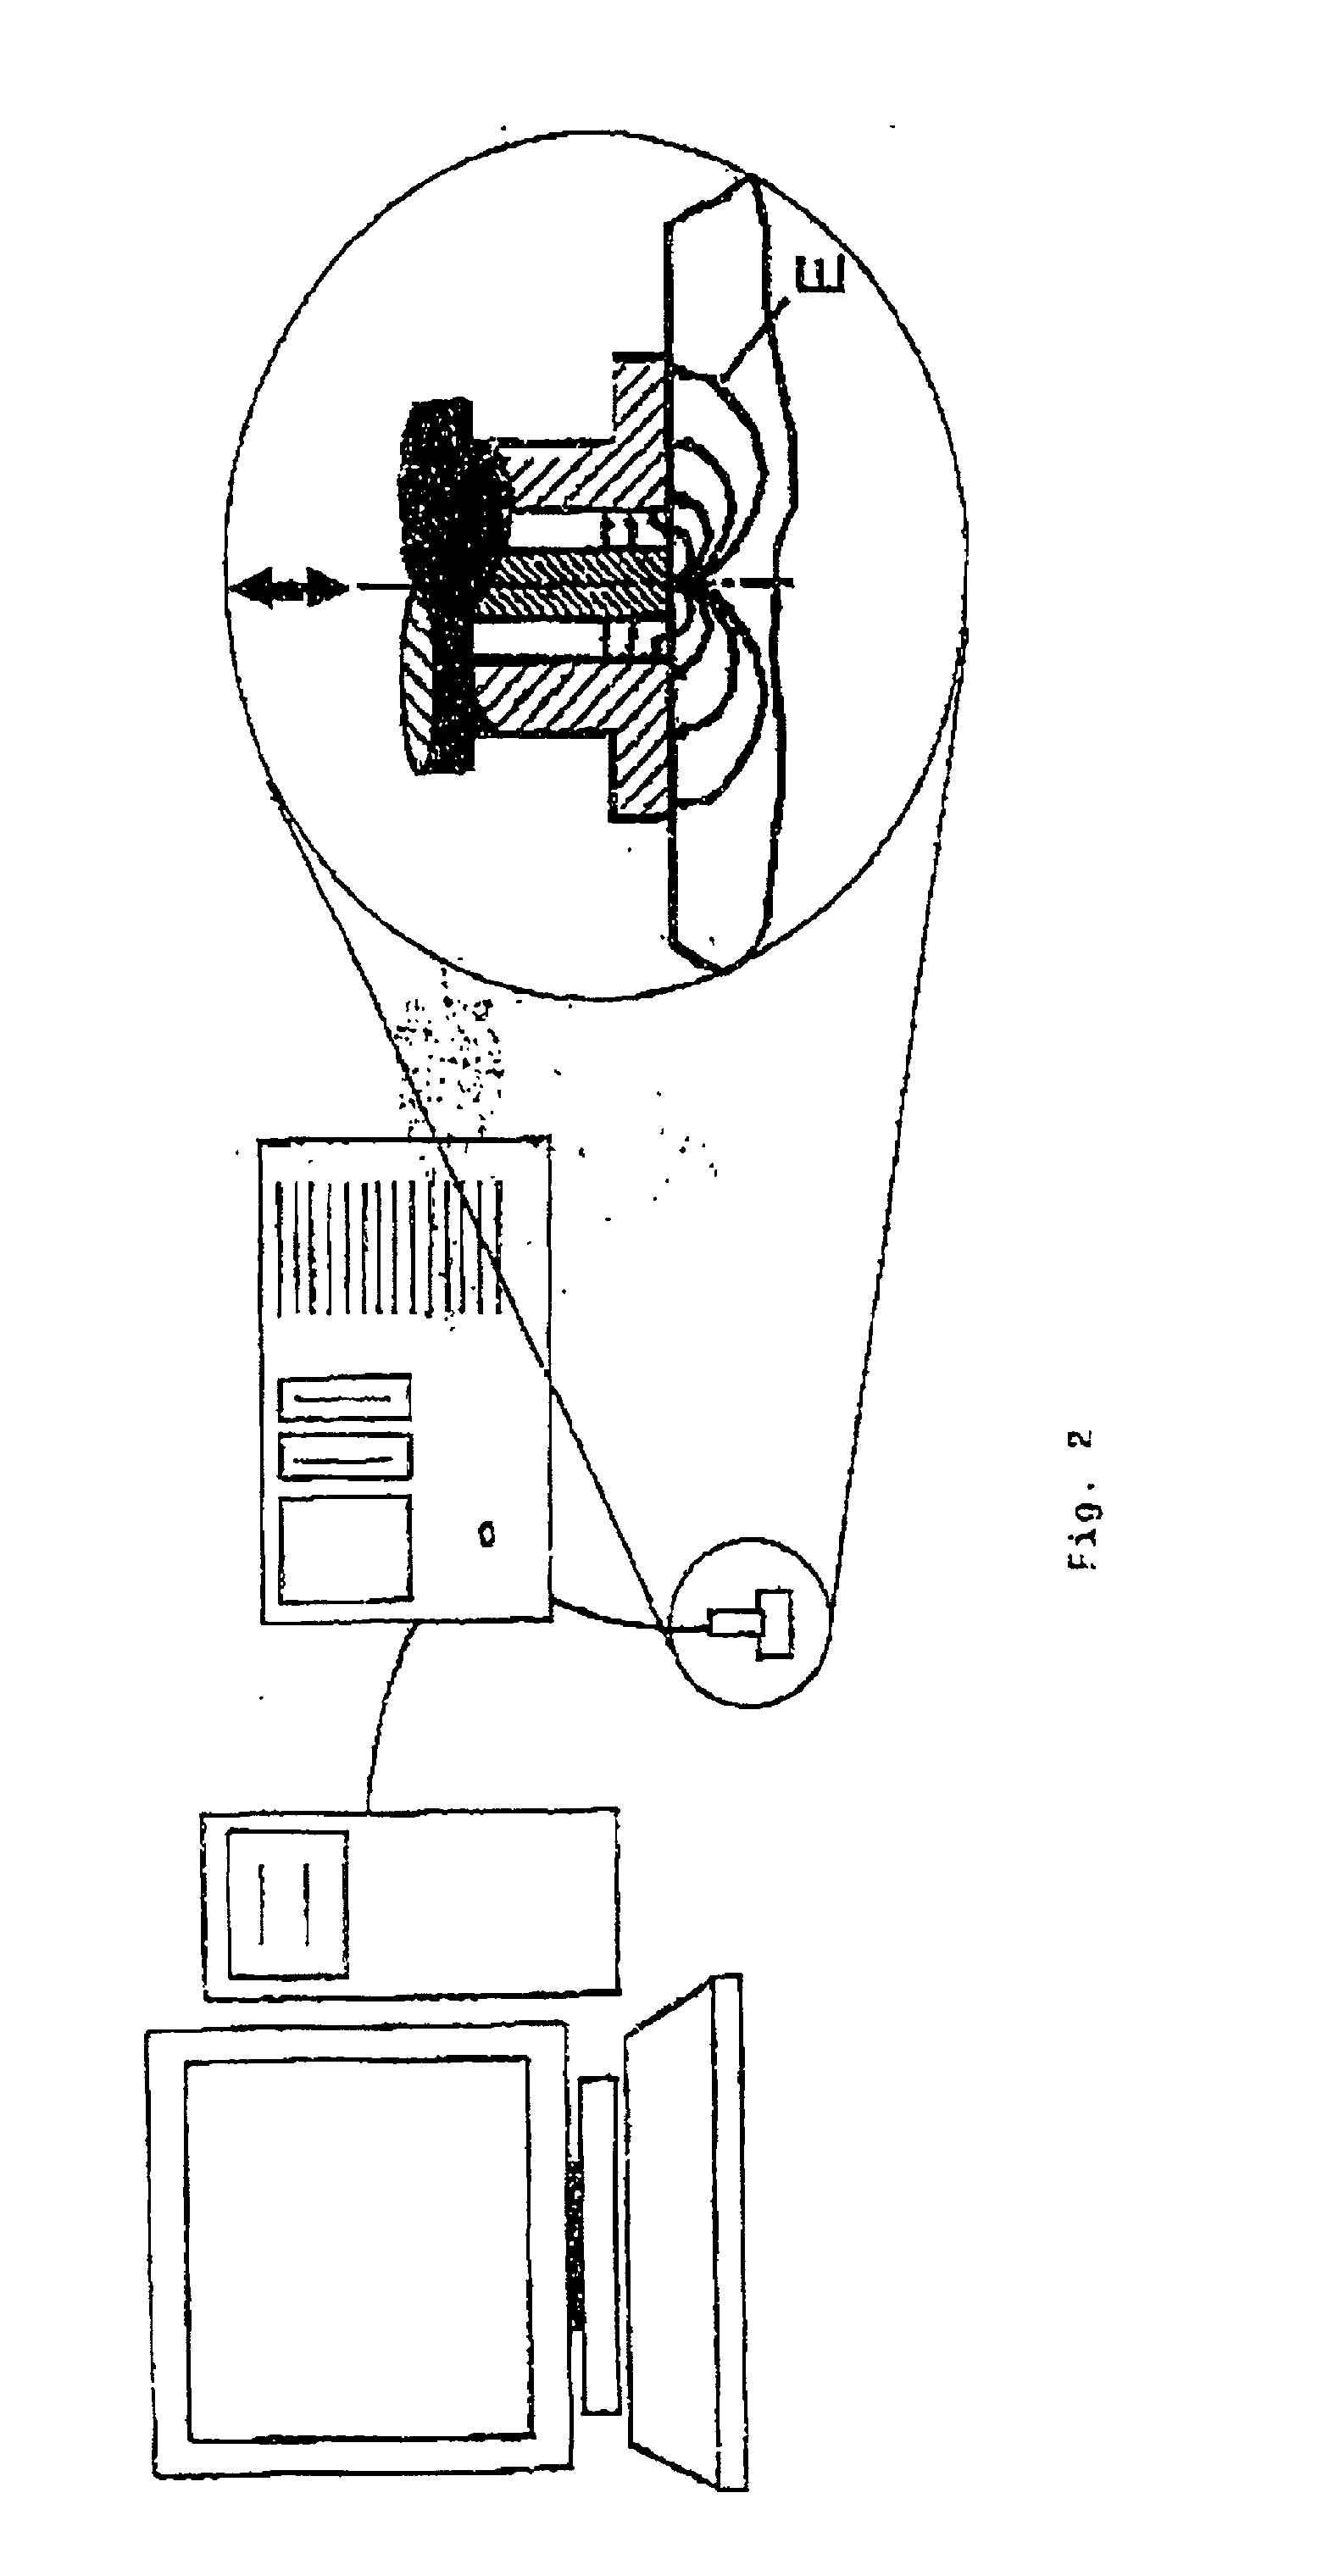 Method, device and computer-readable memory containing a computer program for determining at least one property of a test emulsion and/or test suspension